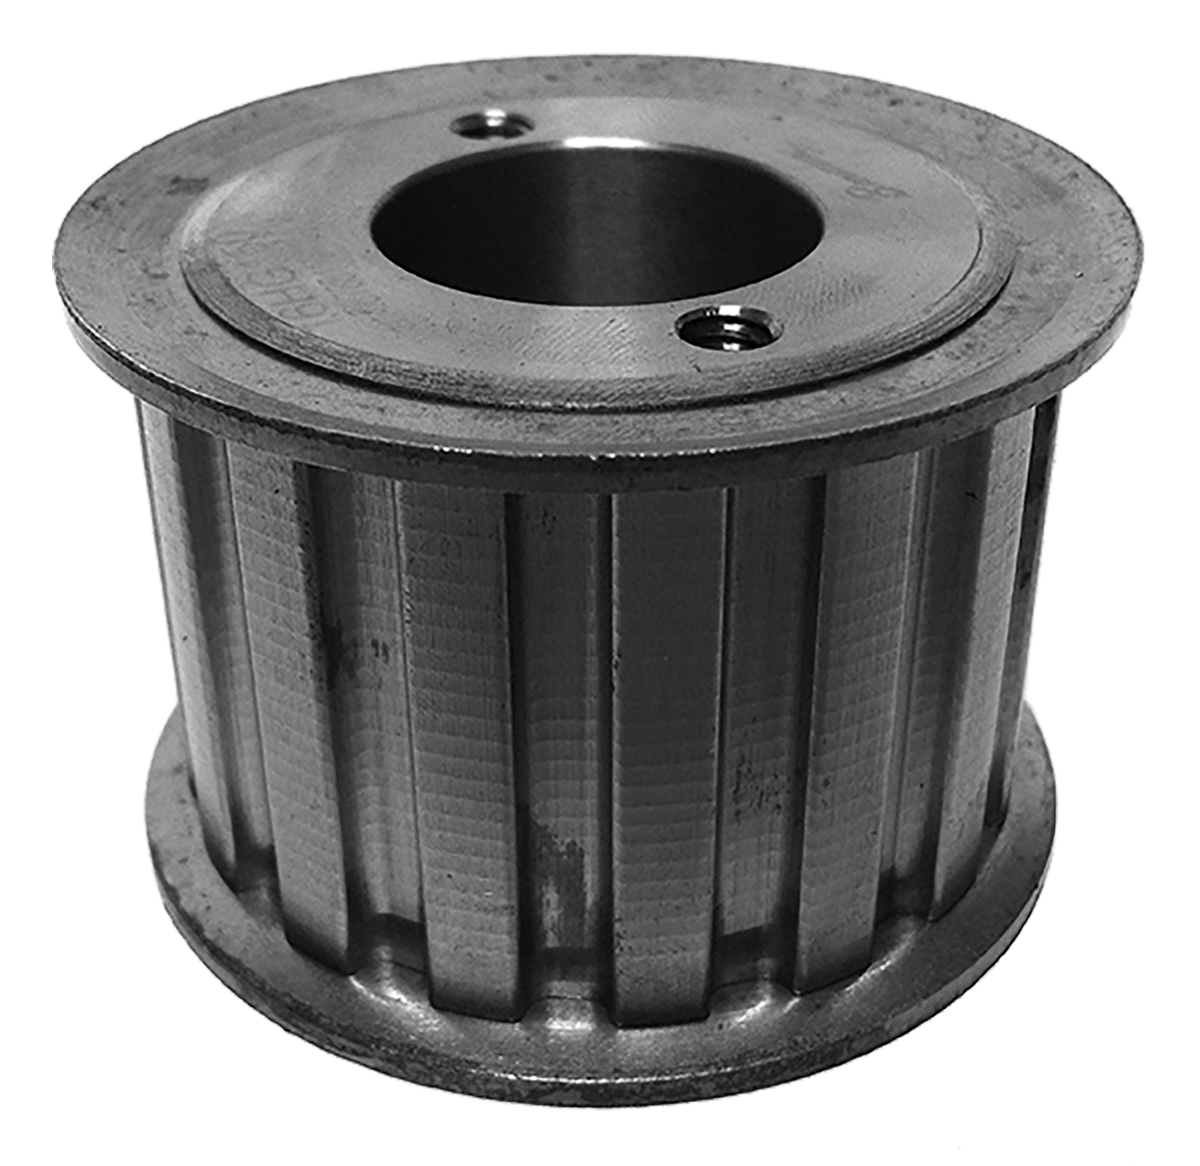 28HP150 - Cast Iron Imperial Pitch Pulleys